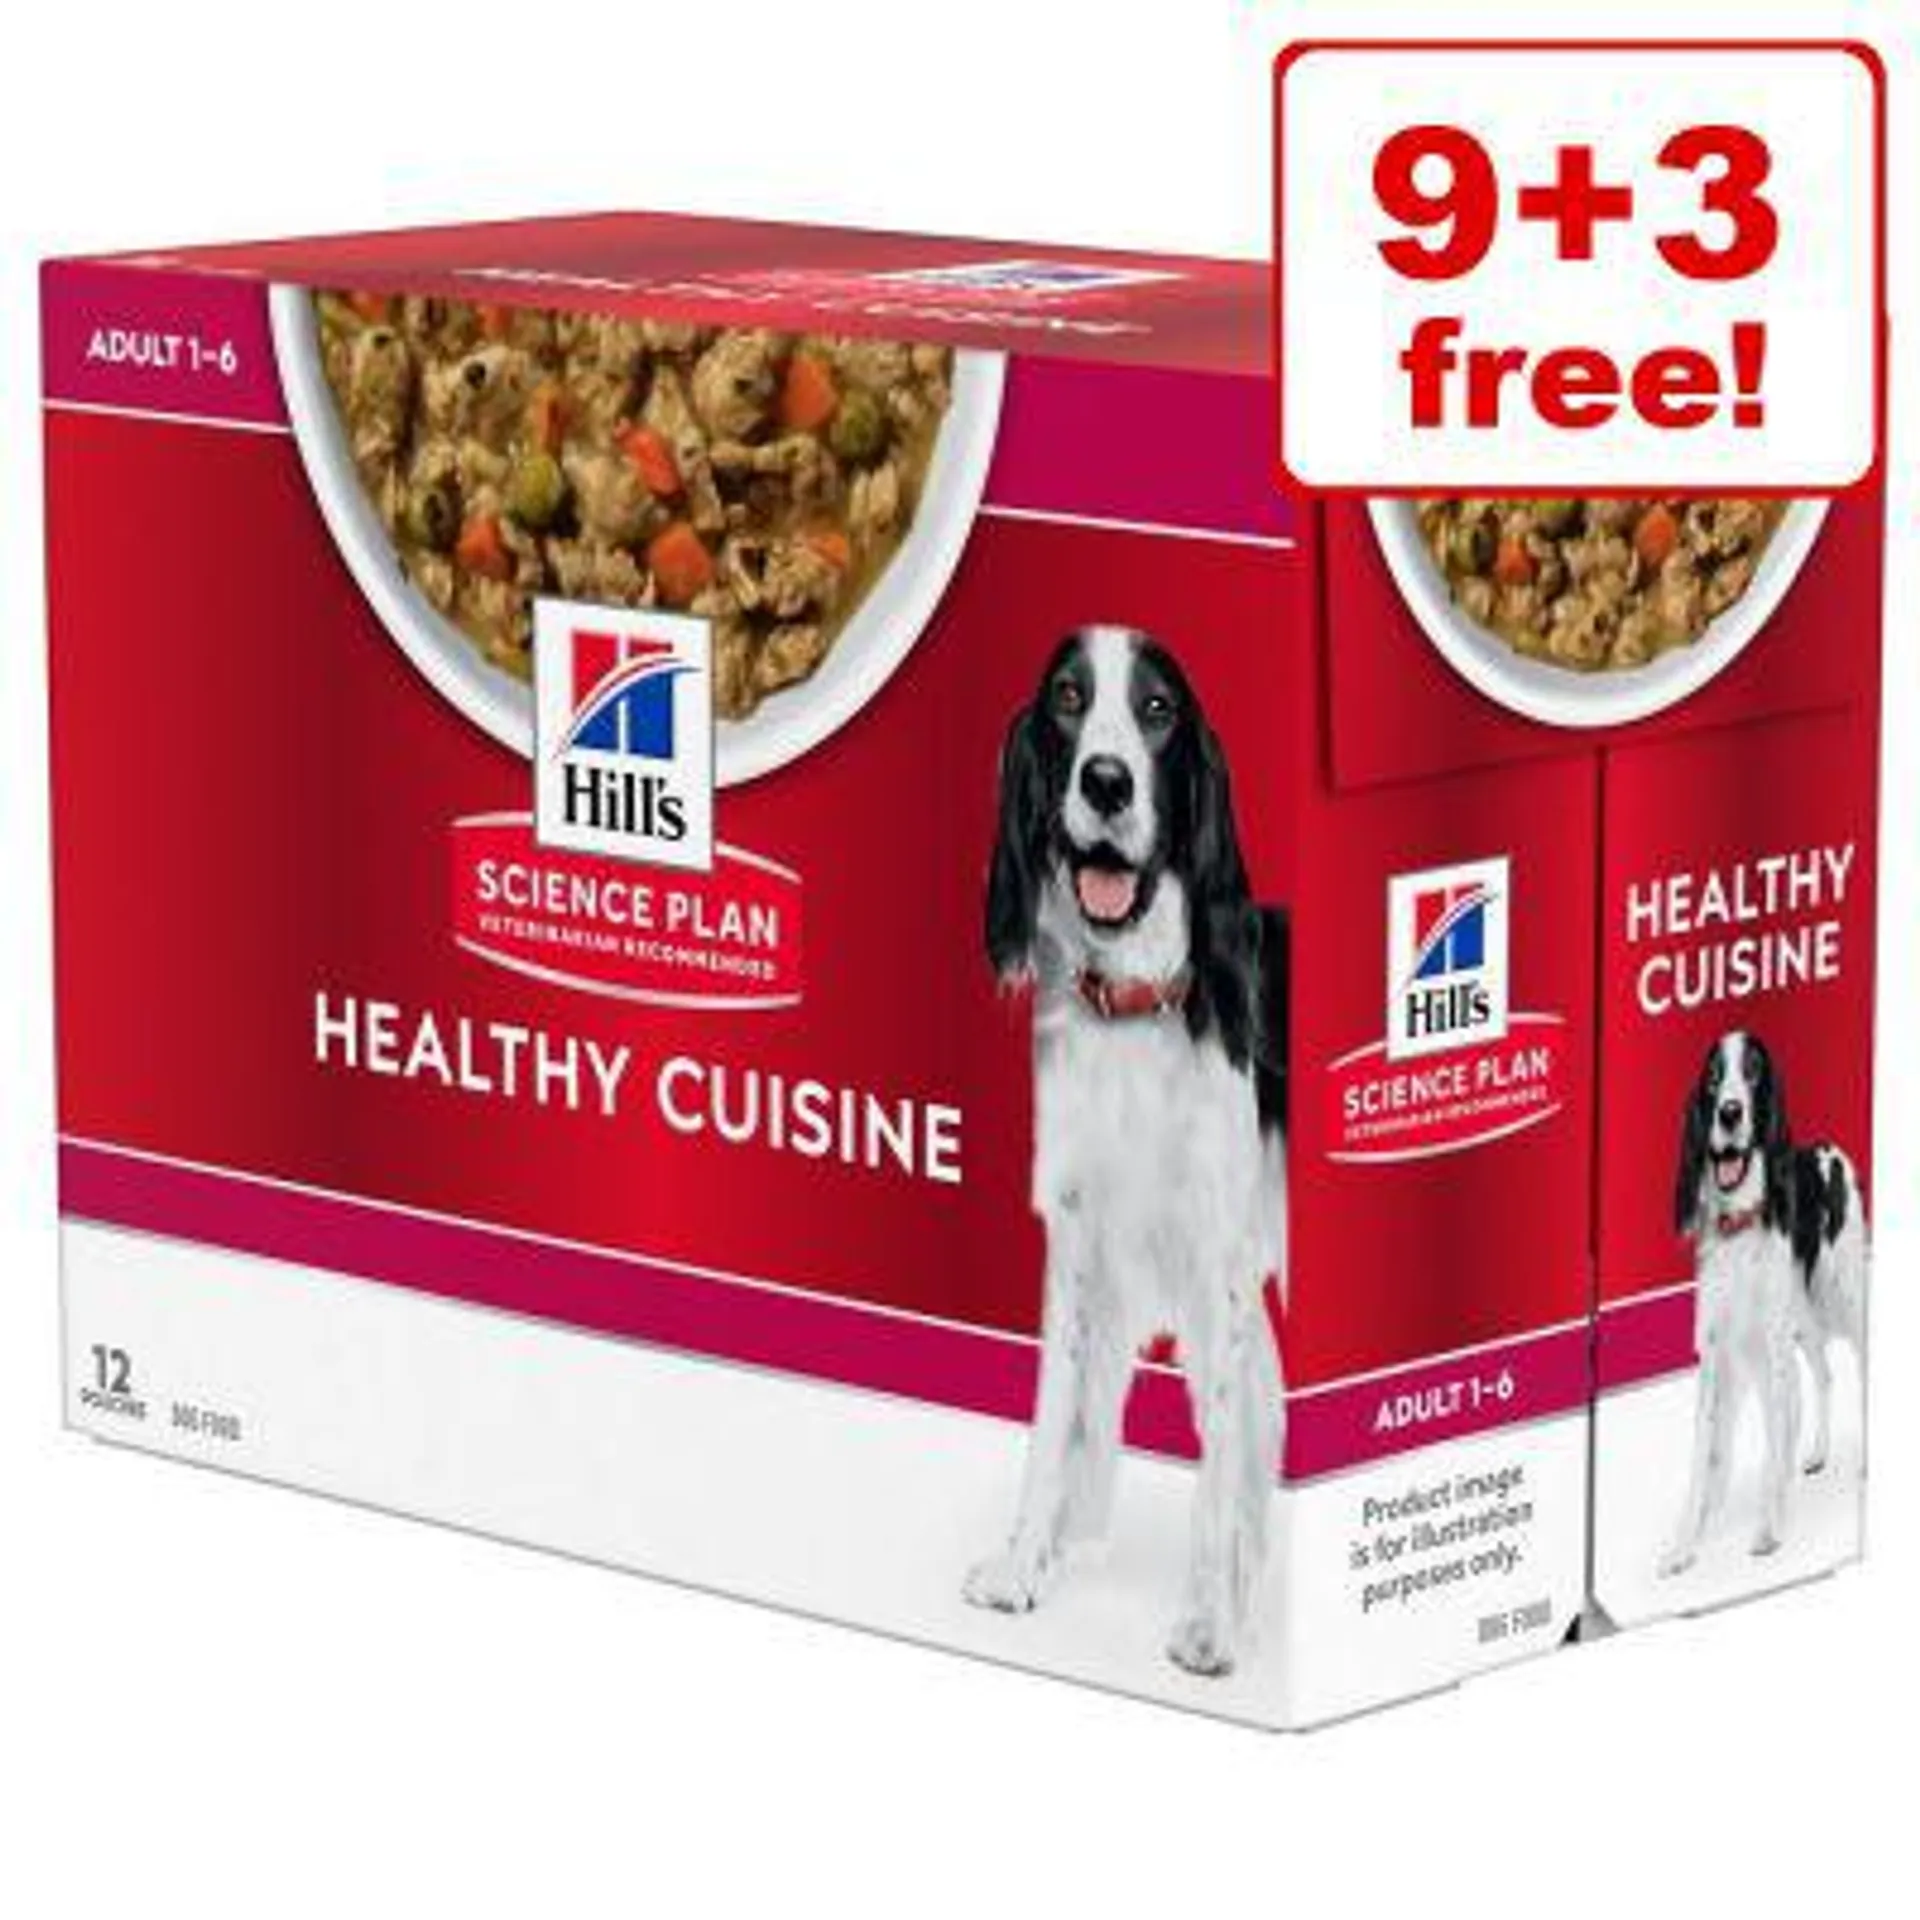 12 x 90g Hill’s Science Plan Adult Healthy Cuisine - 9 + 3 Free!*